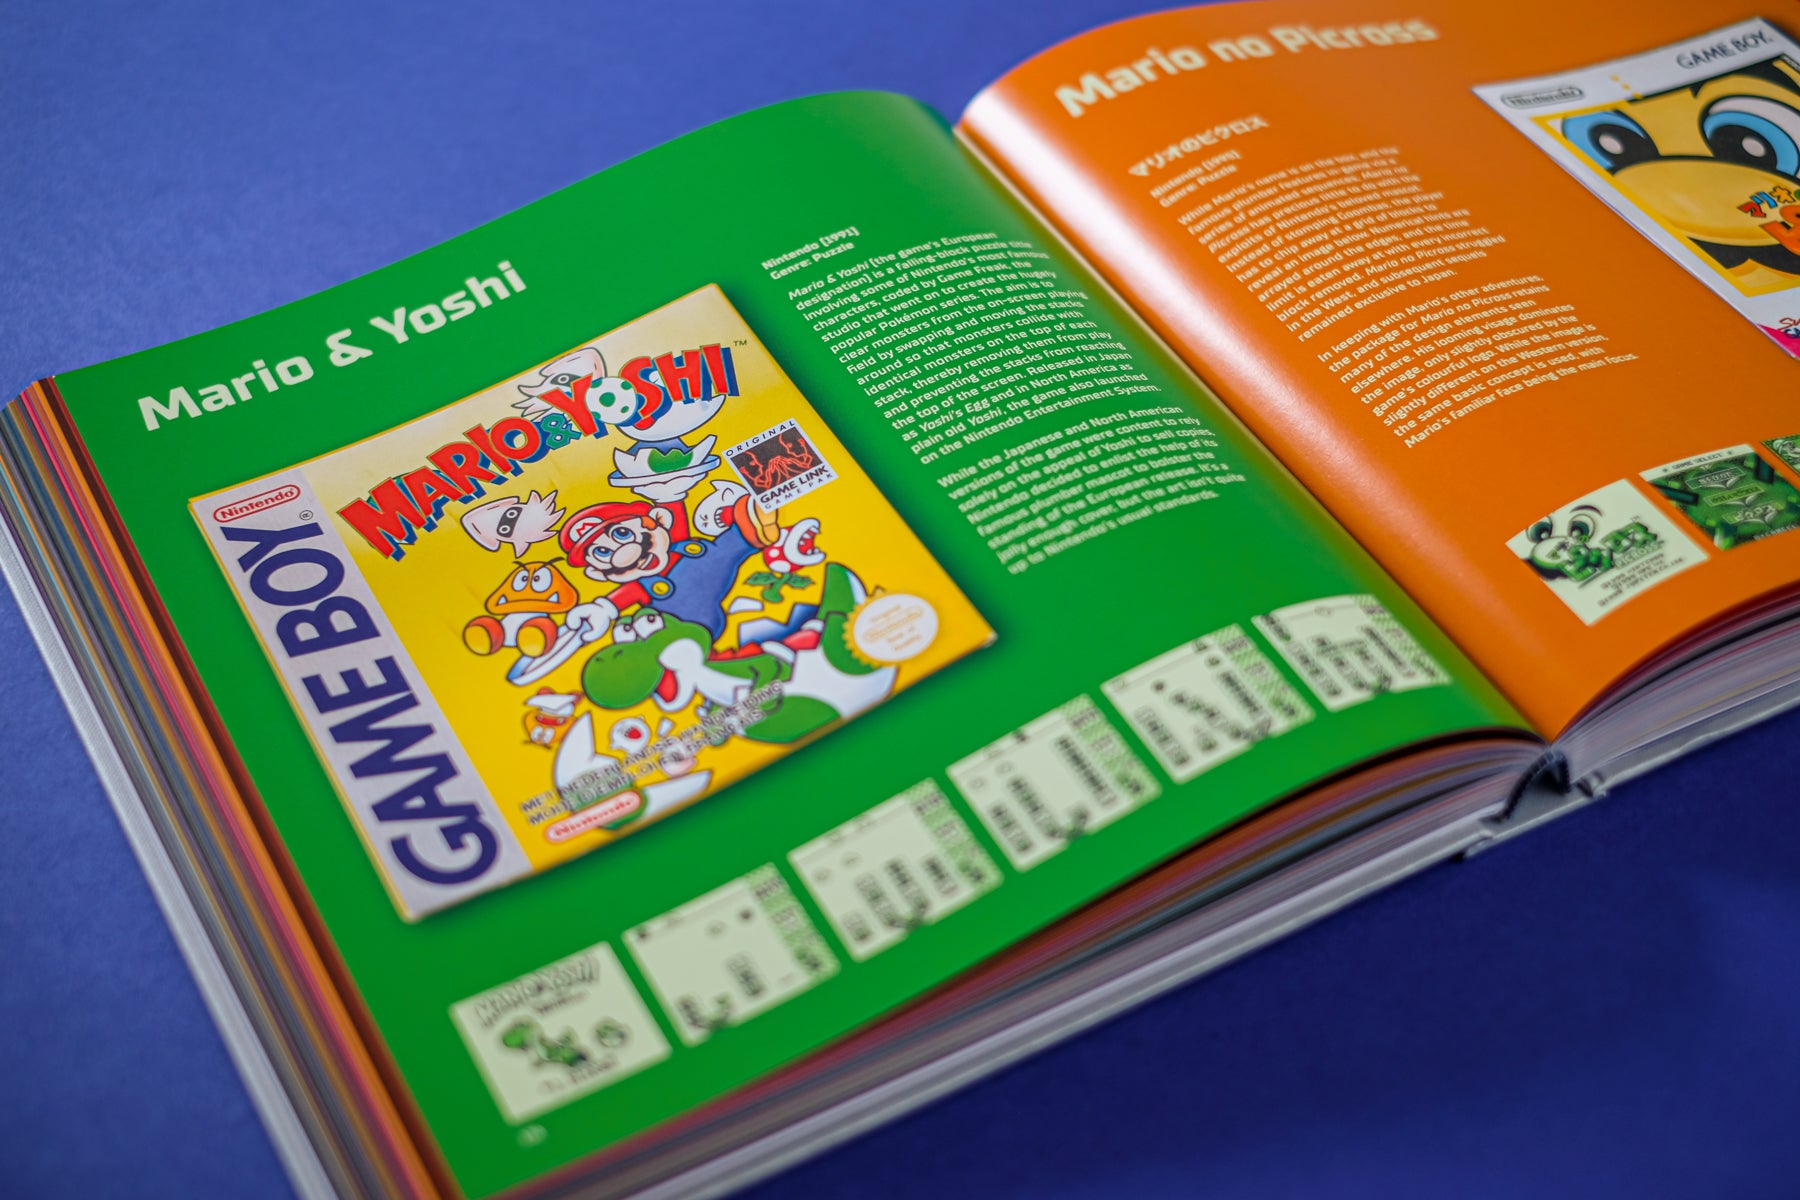 NBA Jam (the book) on X: 1991 promo art for Sonic the Hedgehog on